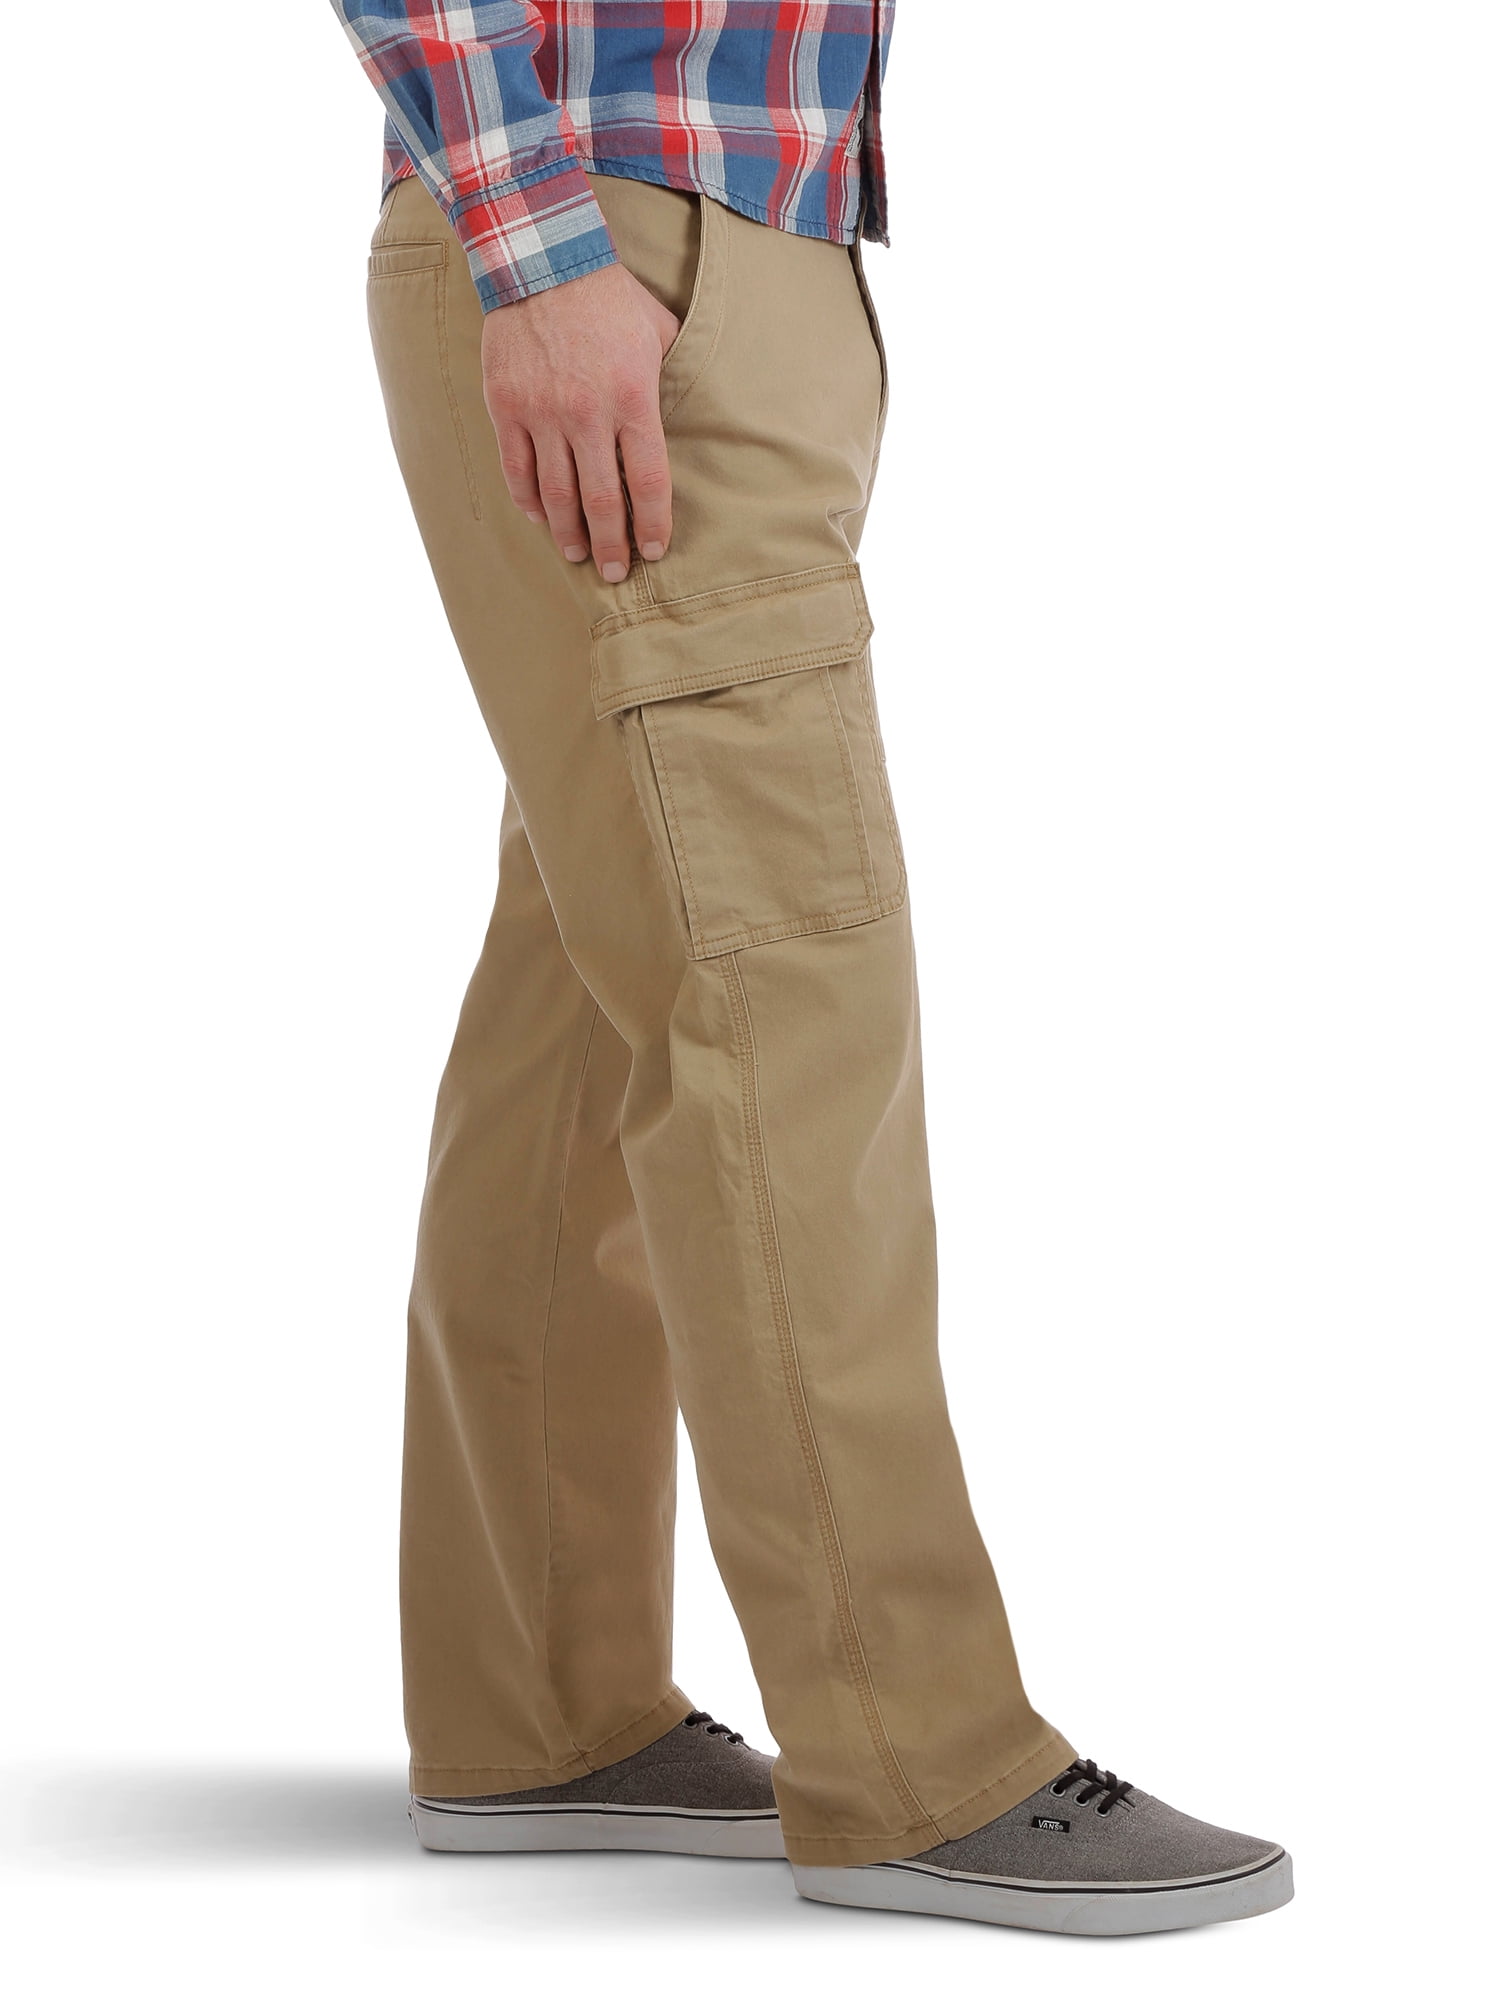 Are You Searching for The Best Cargo Work Pants. Discover Dickies Flex in 2023